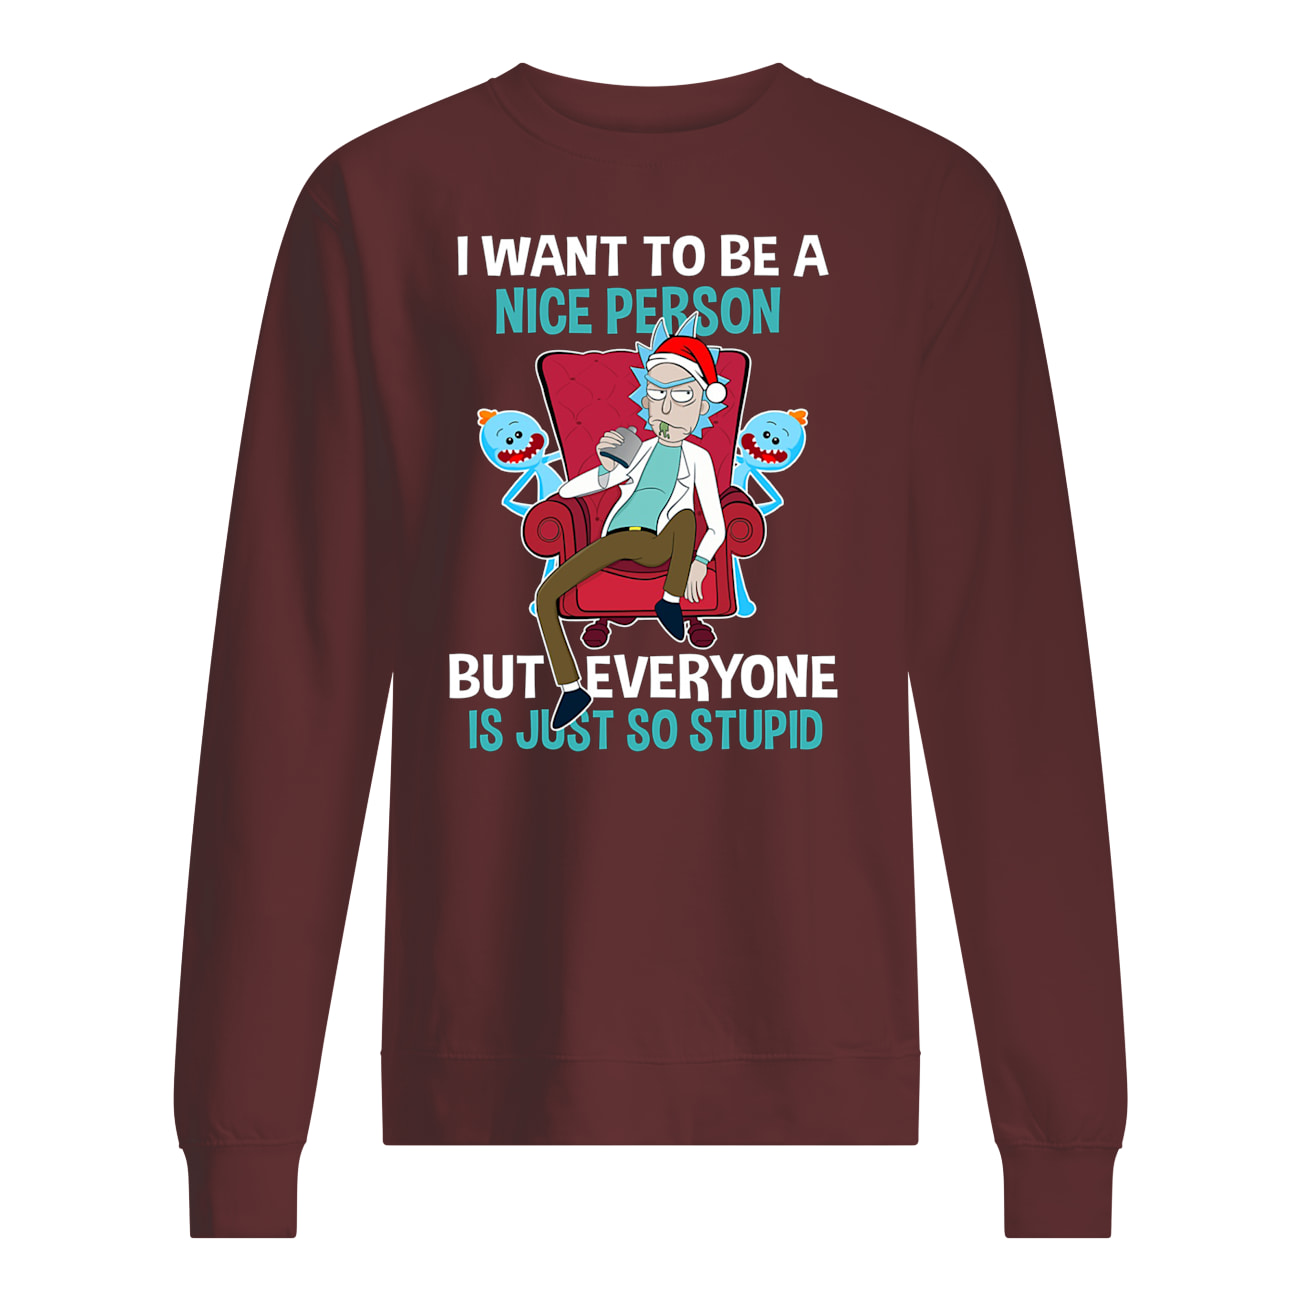 I want to be a nice person but everyone is just so stupid rick and morty sweatshirt